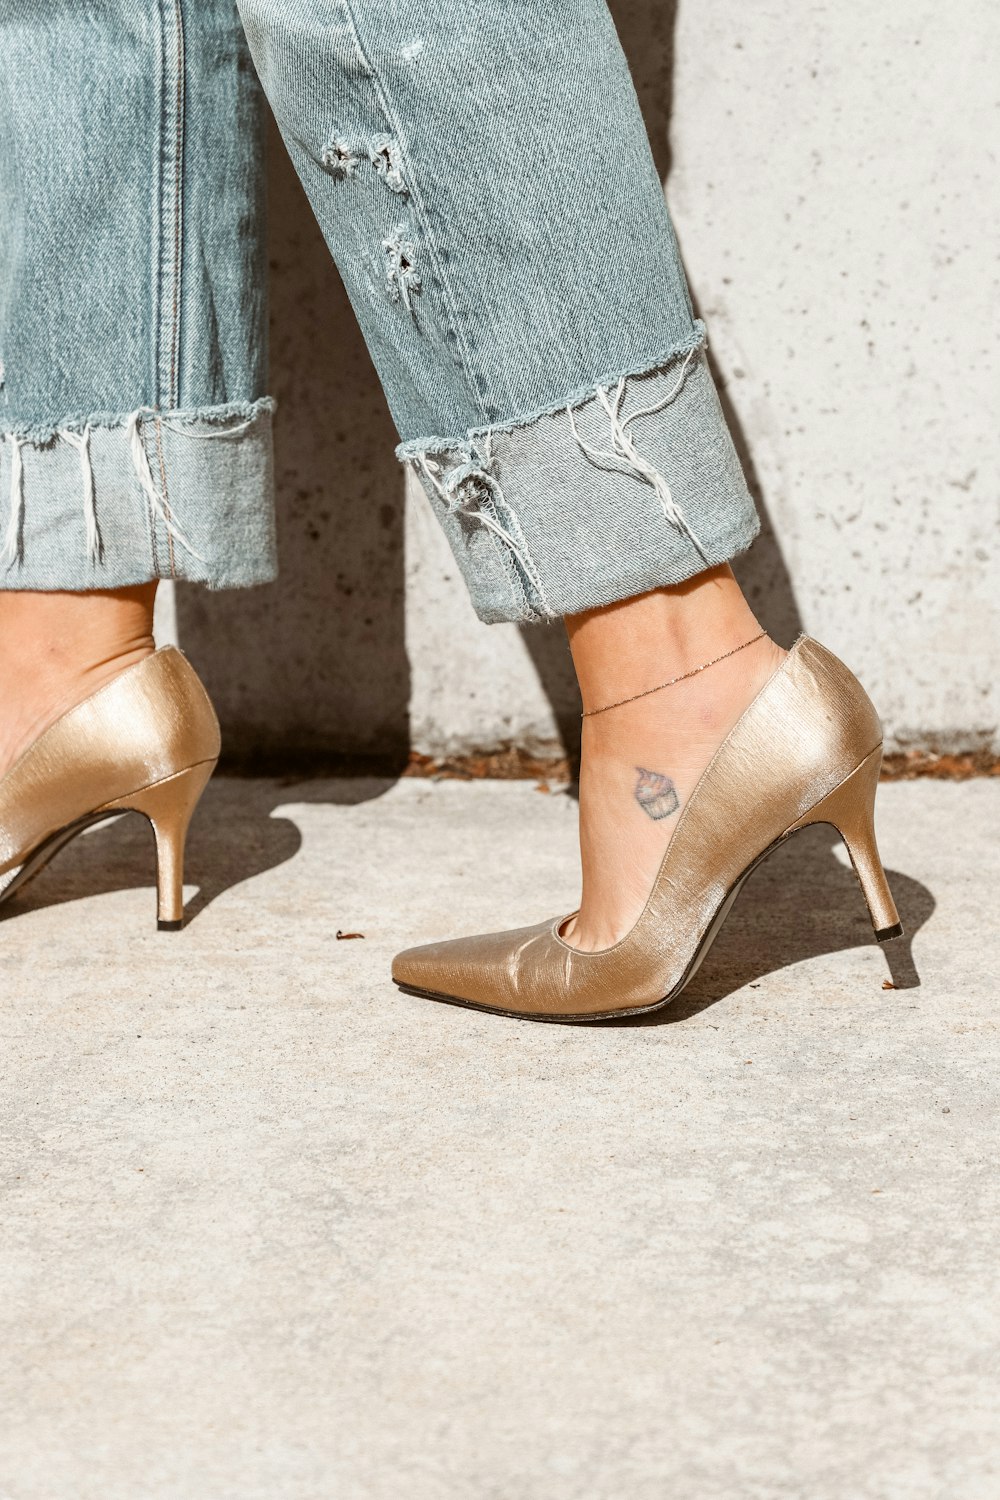 woman in gold heeled shoe with blue denim jeans